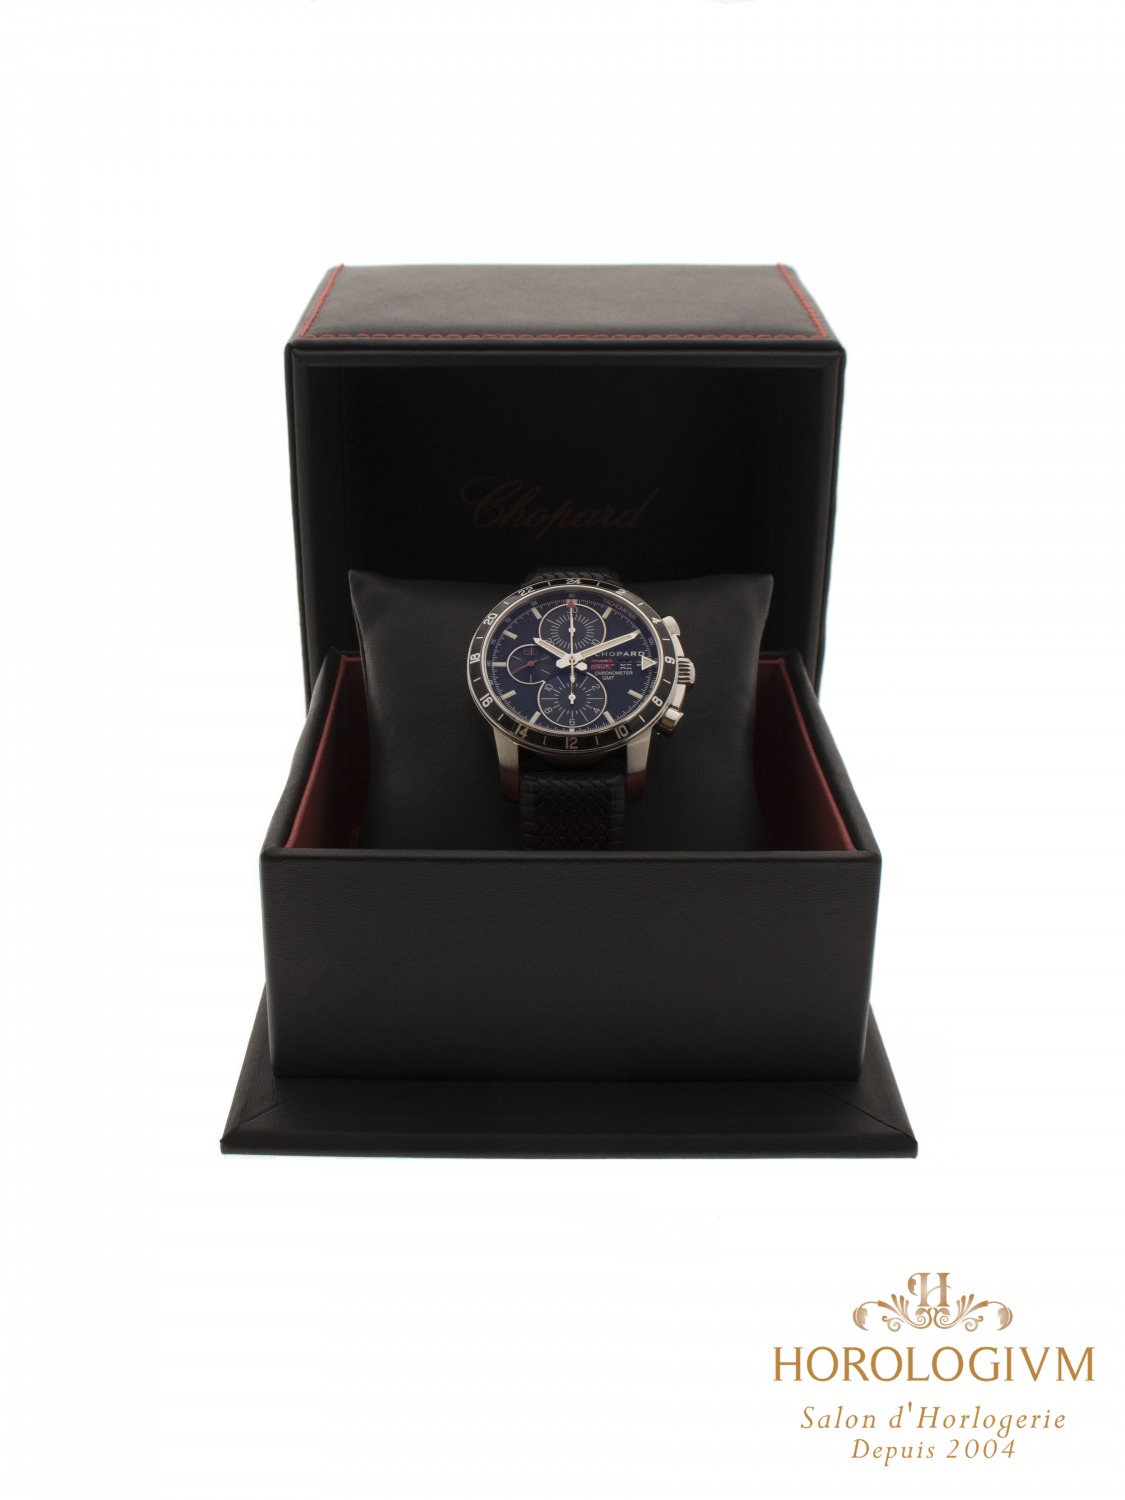 Chopard Mille Miglia Chronometer GMT Limited 2012 pcs Ref. 168550 3001 watch, silver (case) and black (bezel)